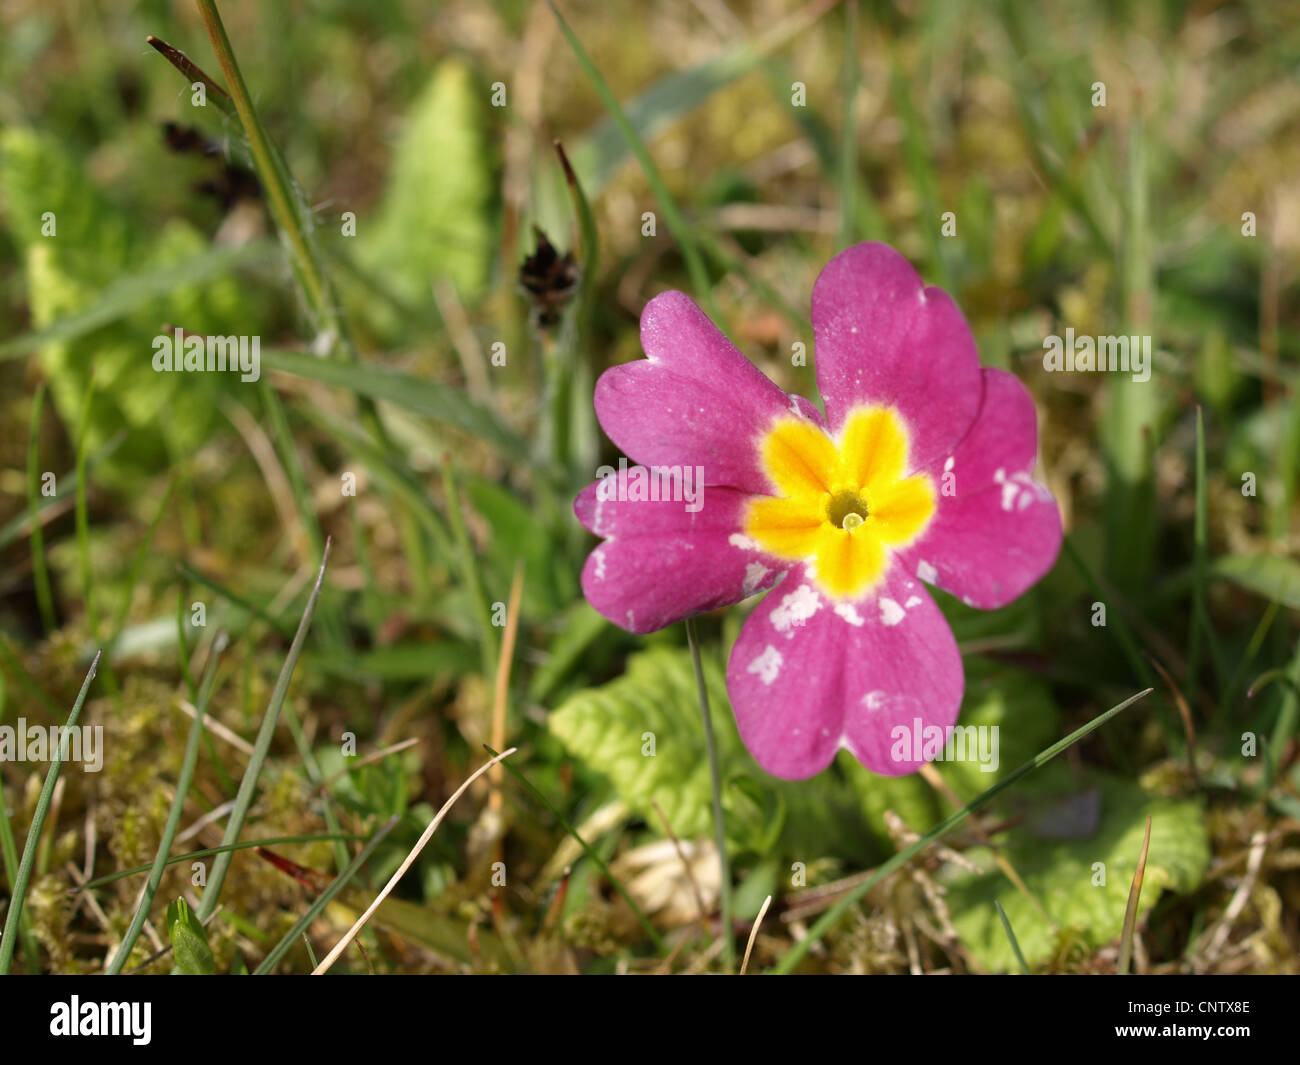 Page 3 - Primeln High Resolution Stock Photography and Images - Alamy